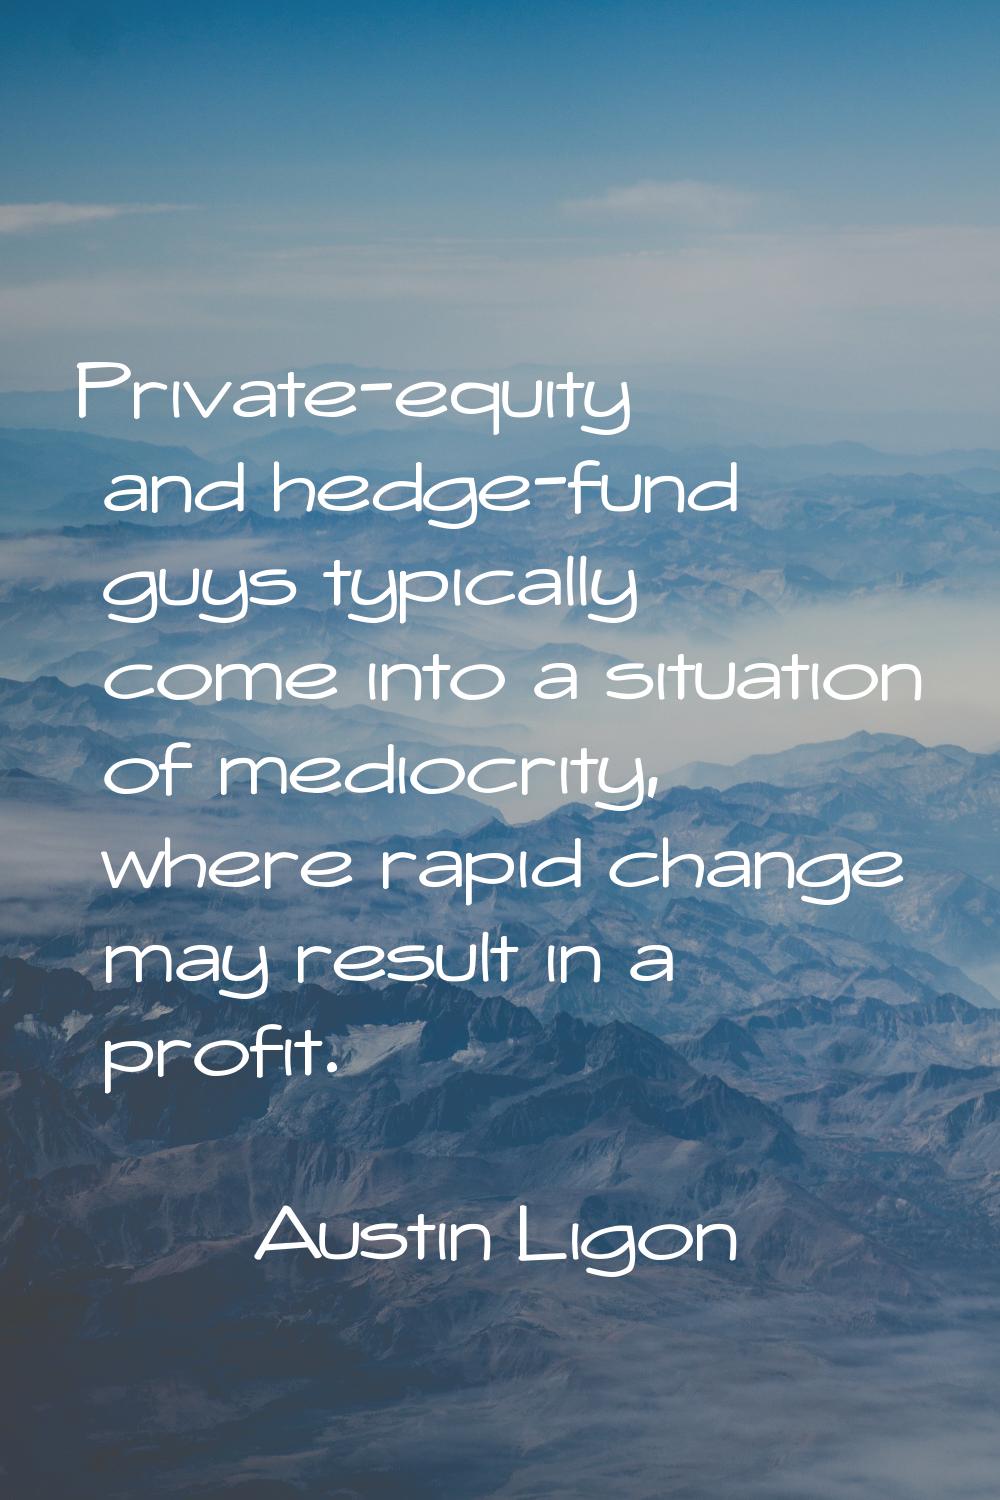 Private-equity and hedge-fund guys typically come into a situation of mediocrity, where rapid chang